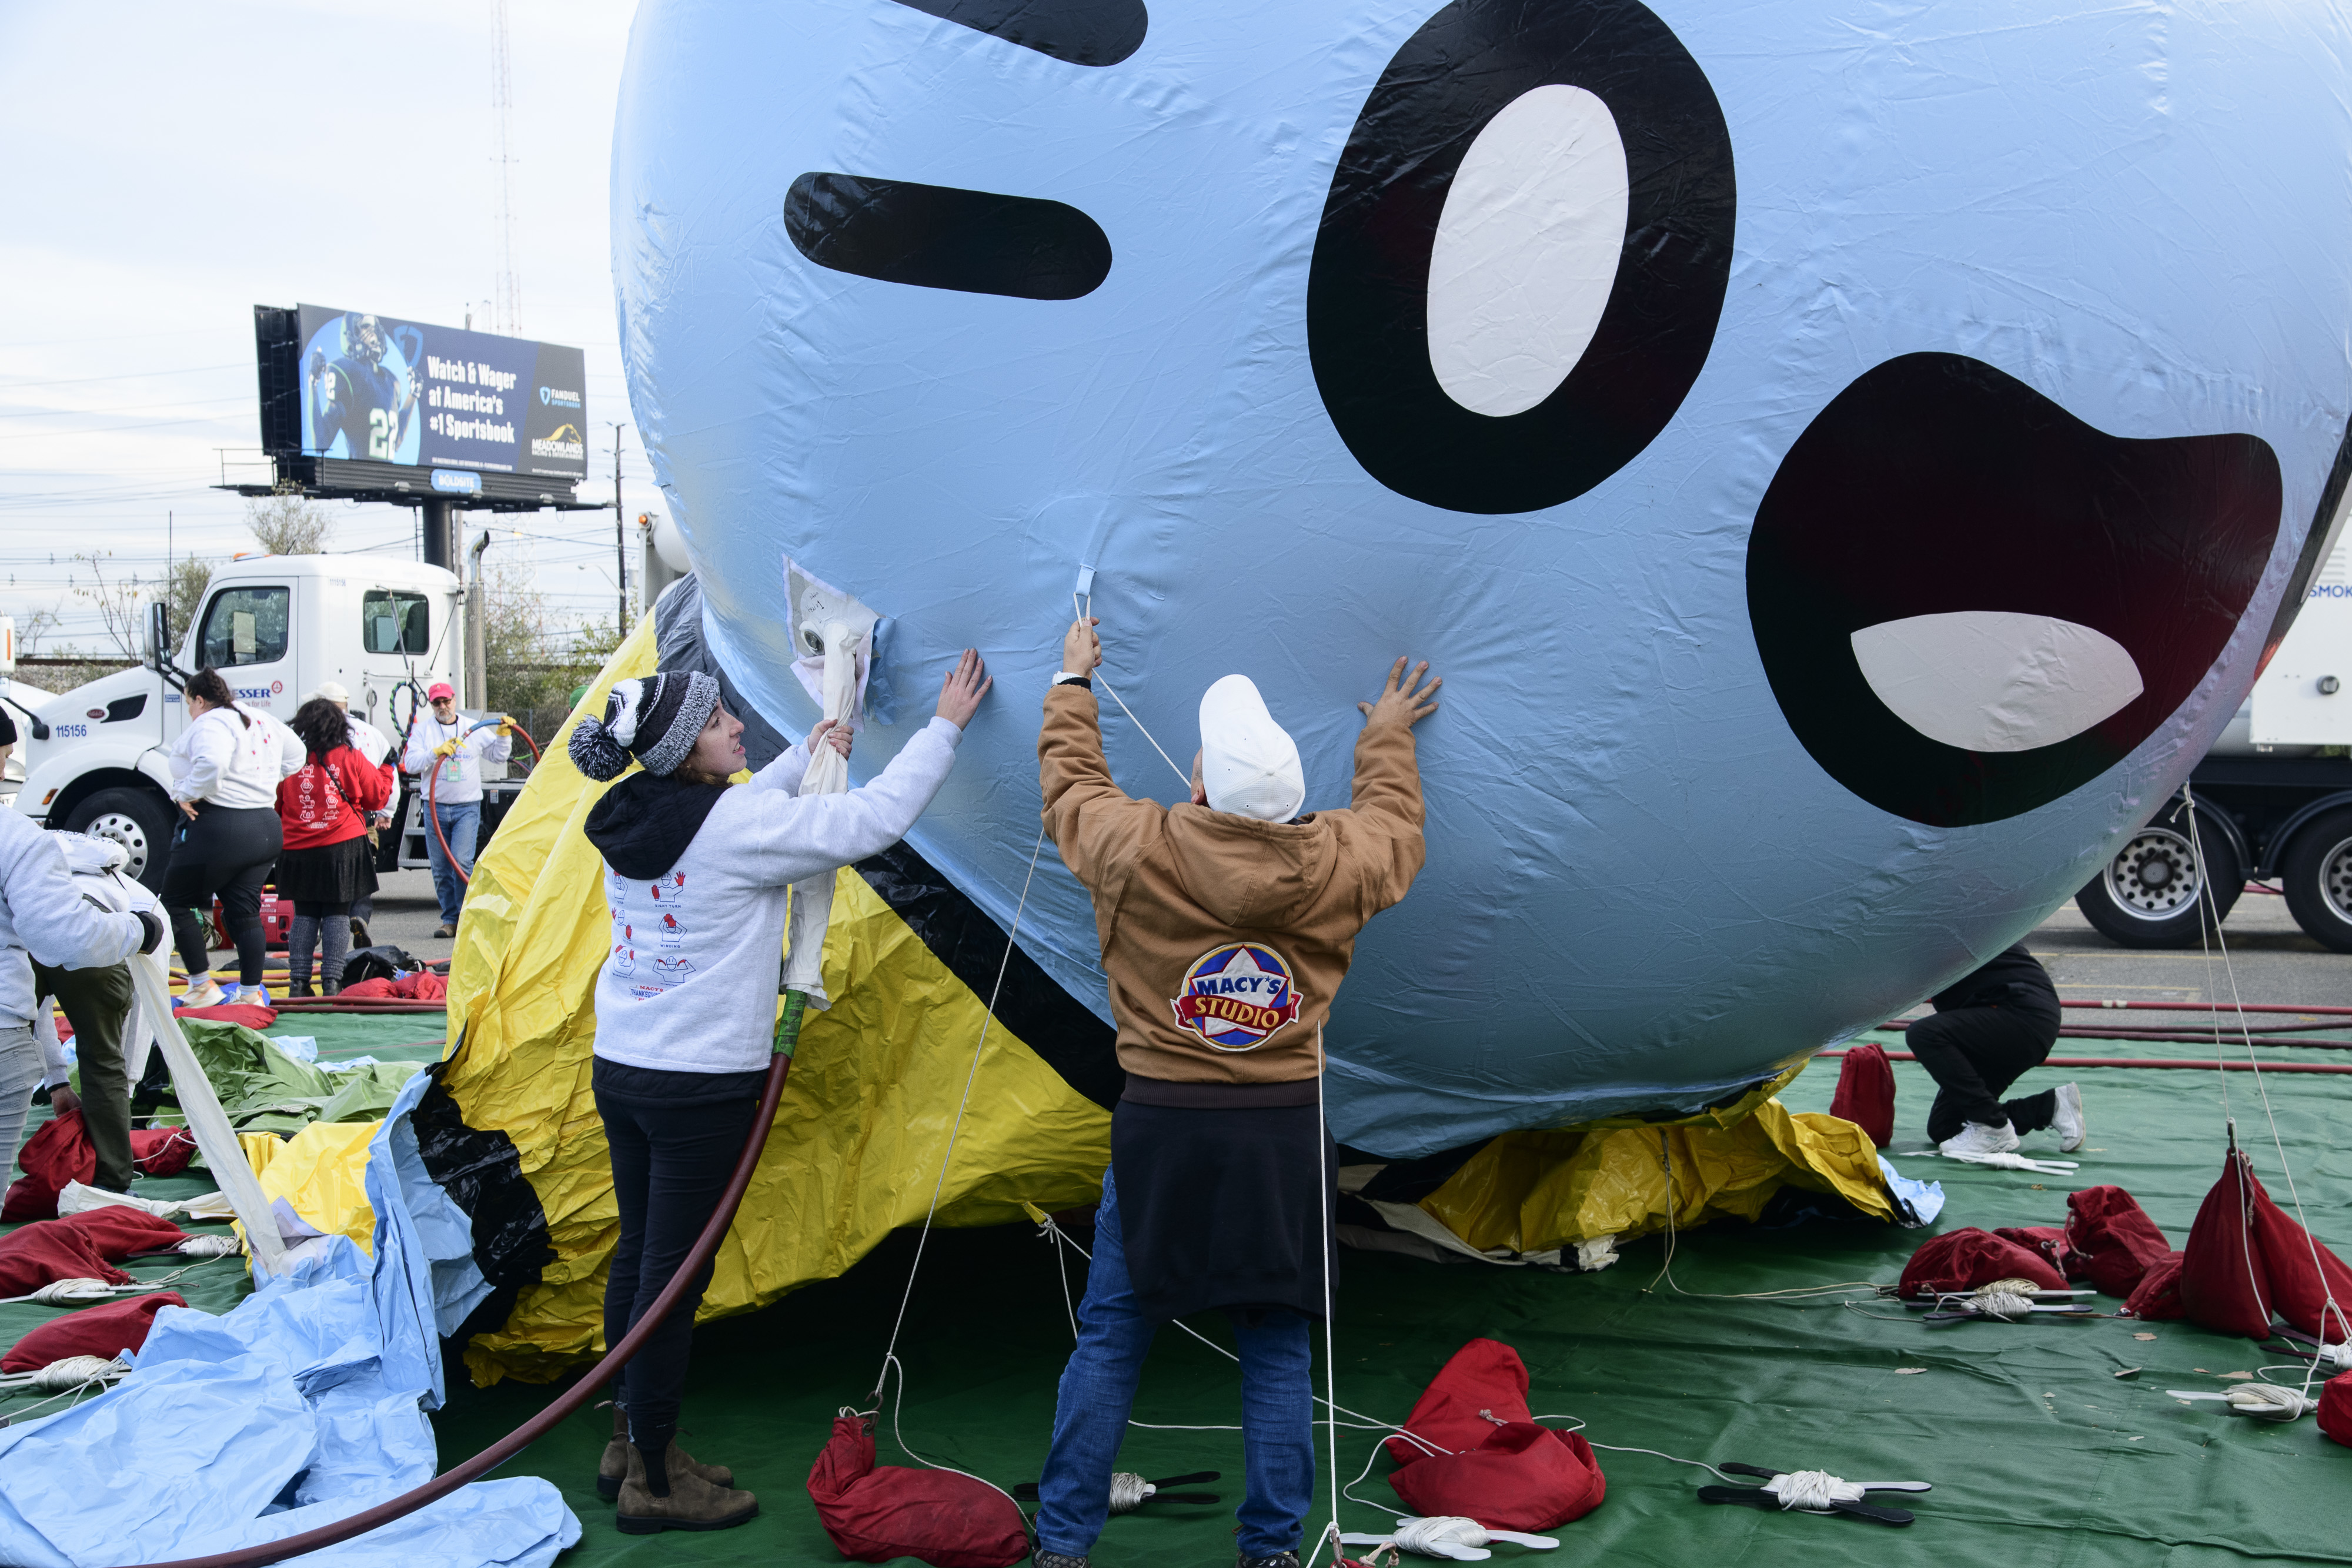 The Blue Cat balloon being inflated